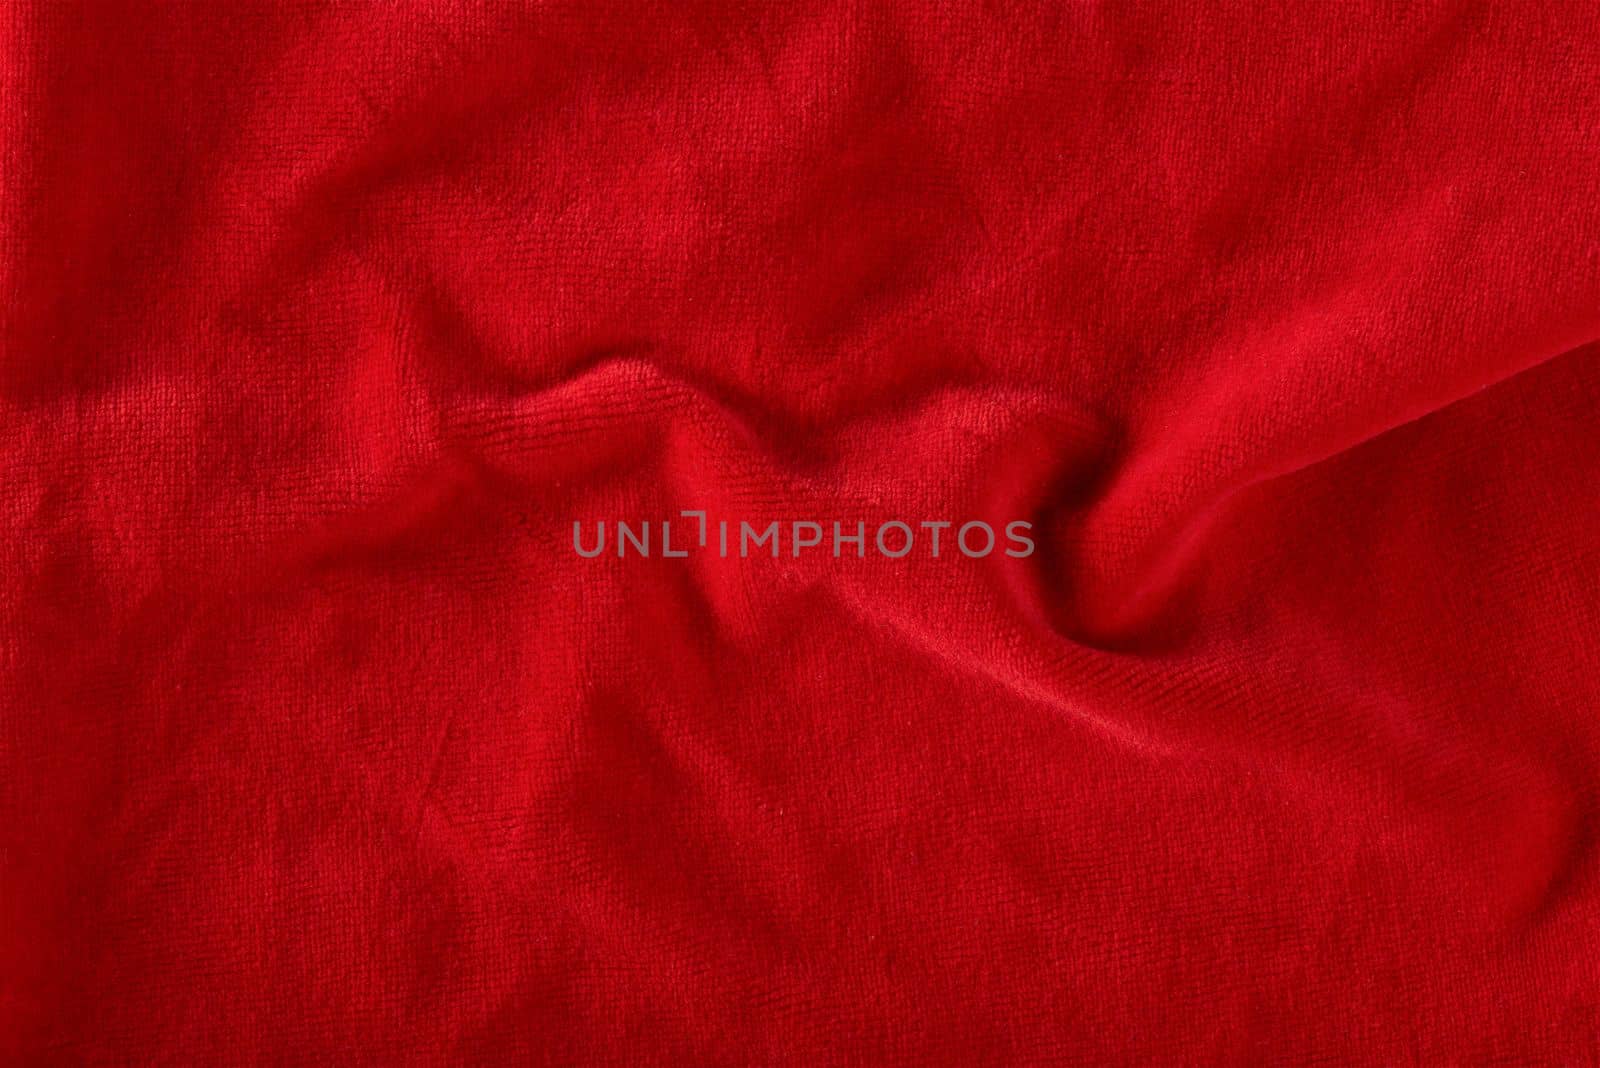 Red velvet texture for postcard or background for design. Red background for Christmas theme or Valentine's day, high quality, large format. Abstract texture of draped red velvet by SERSOL